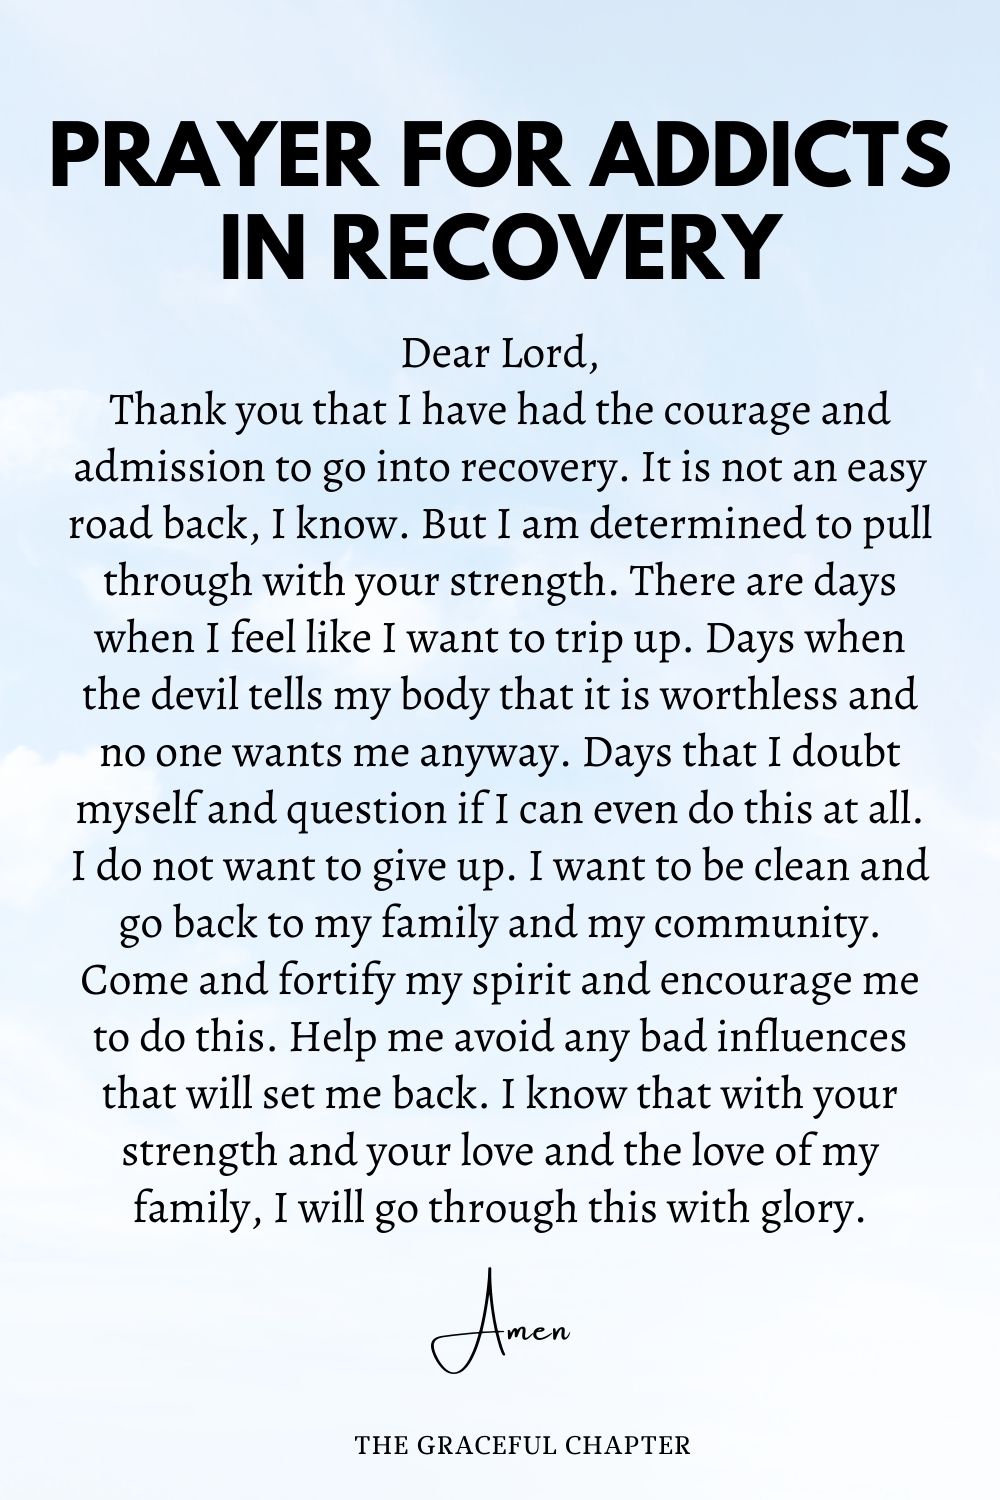 Prayer for Addicts in Recovery